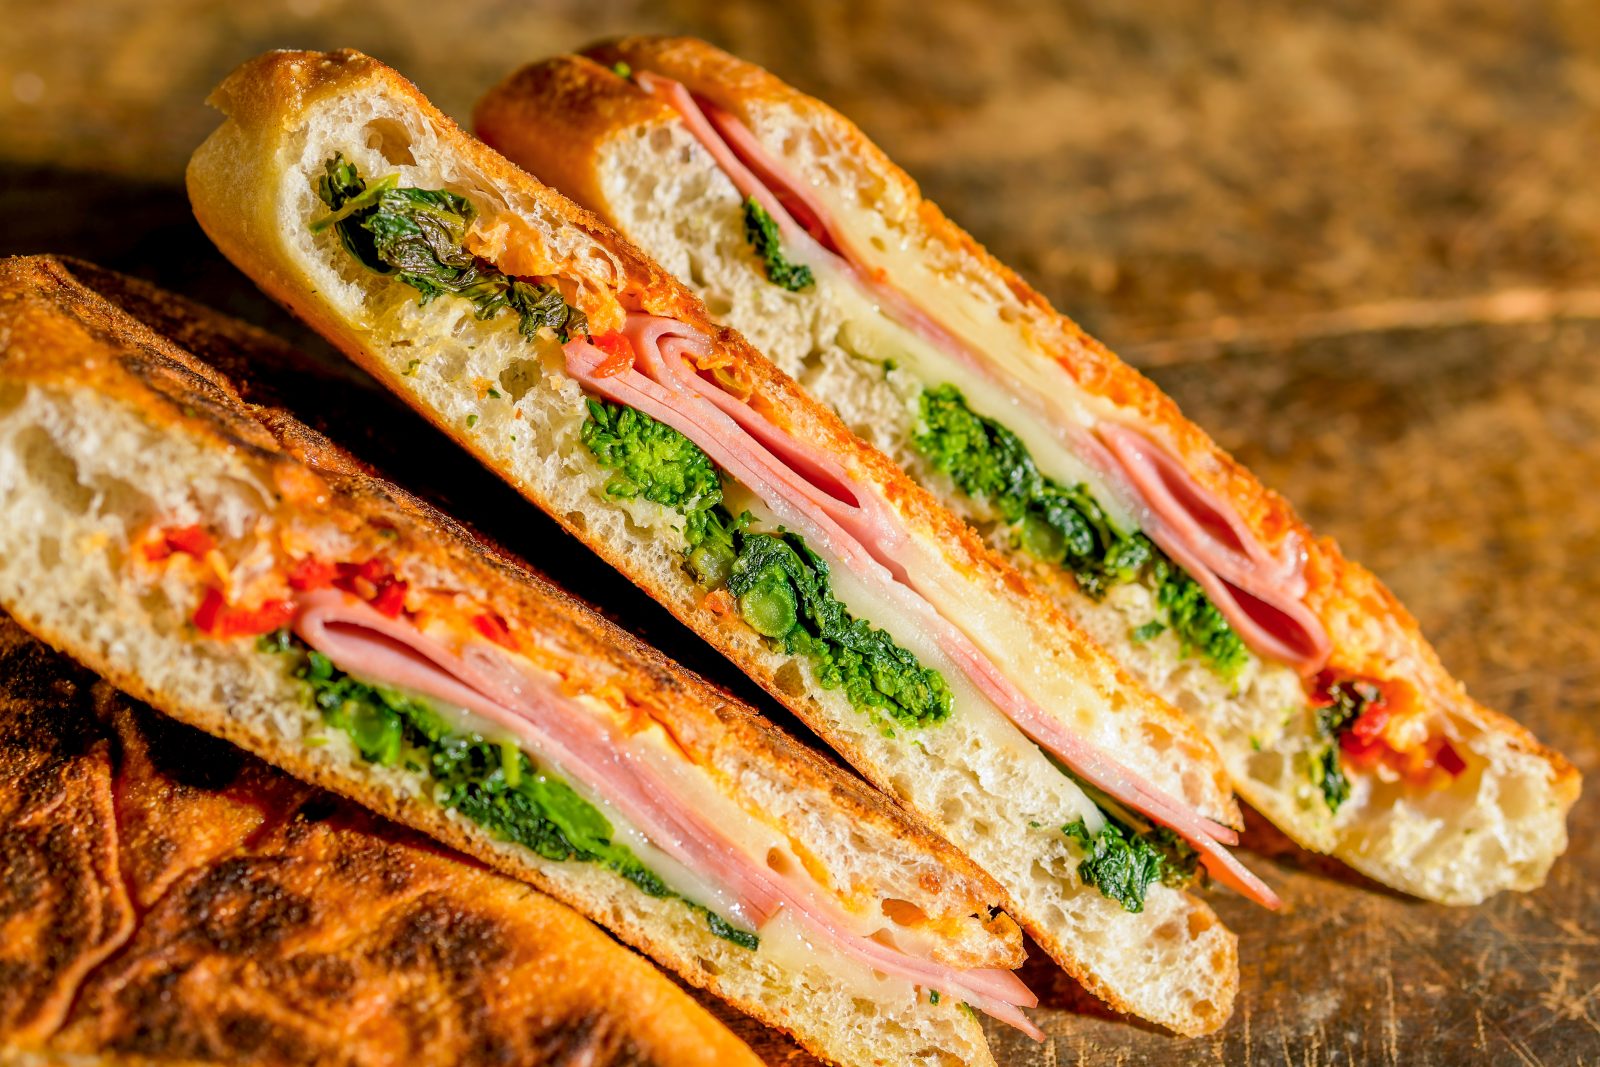 Best Panini with Mortadella, Provolone and Broccoli Rabe Recipe - How to  Make Panini with Mortadella, Provolone and Broccoli Rabe